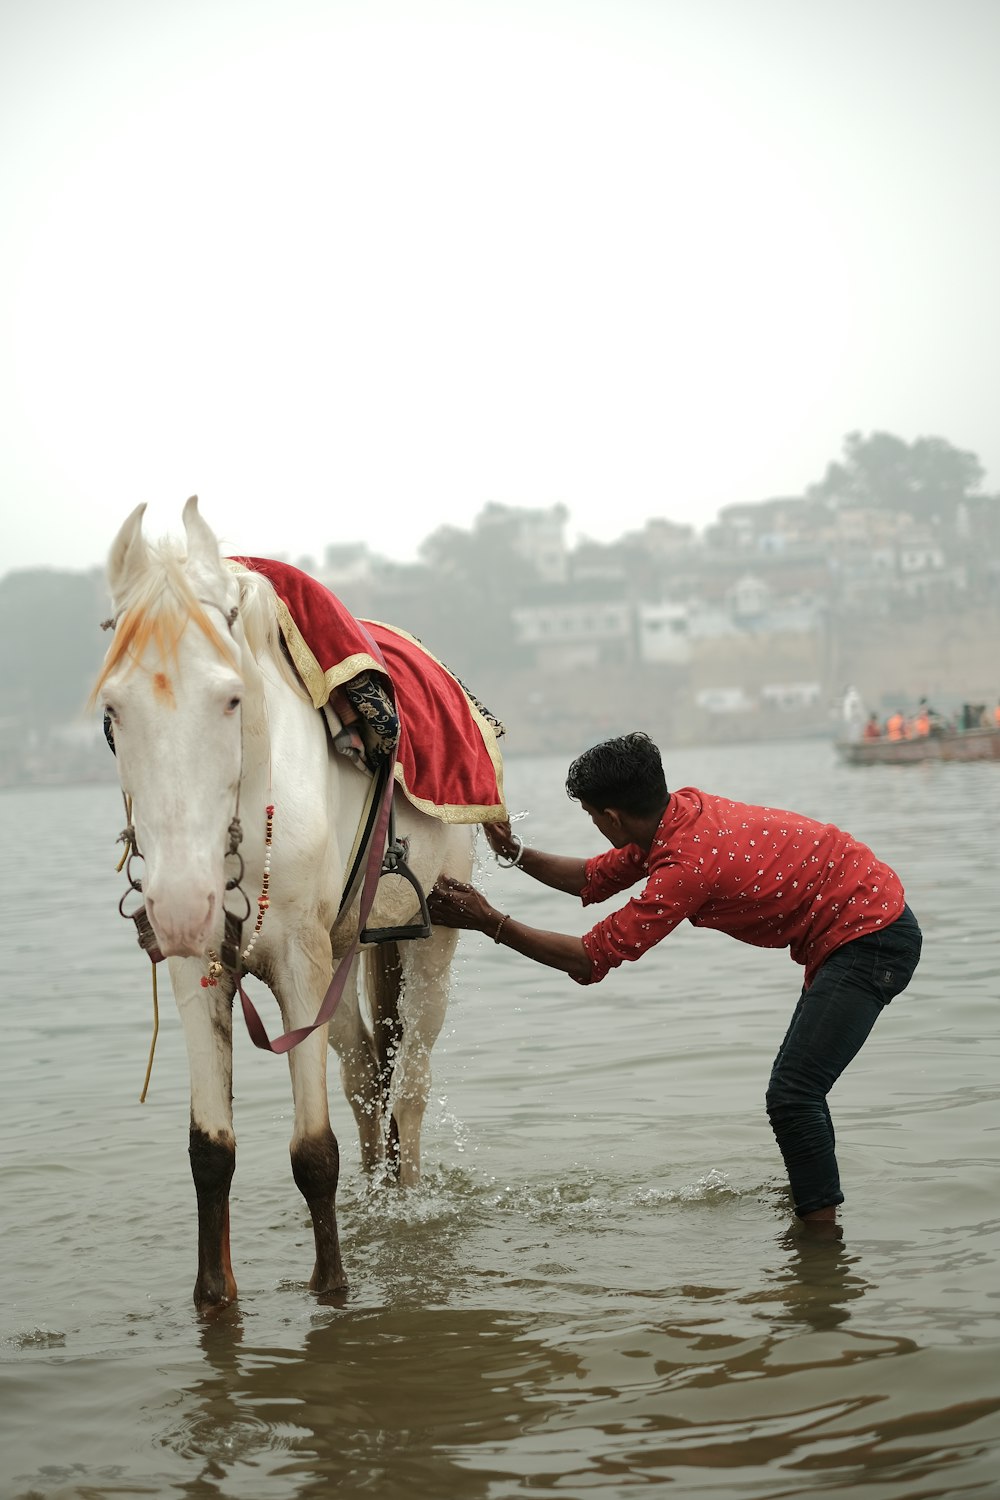 a man standing next to a white horse in a body of water